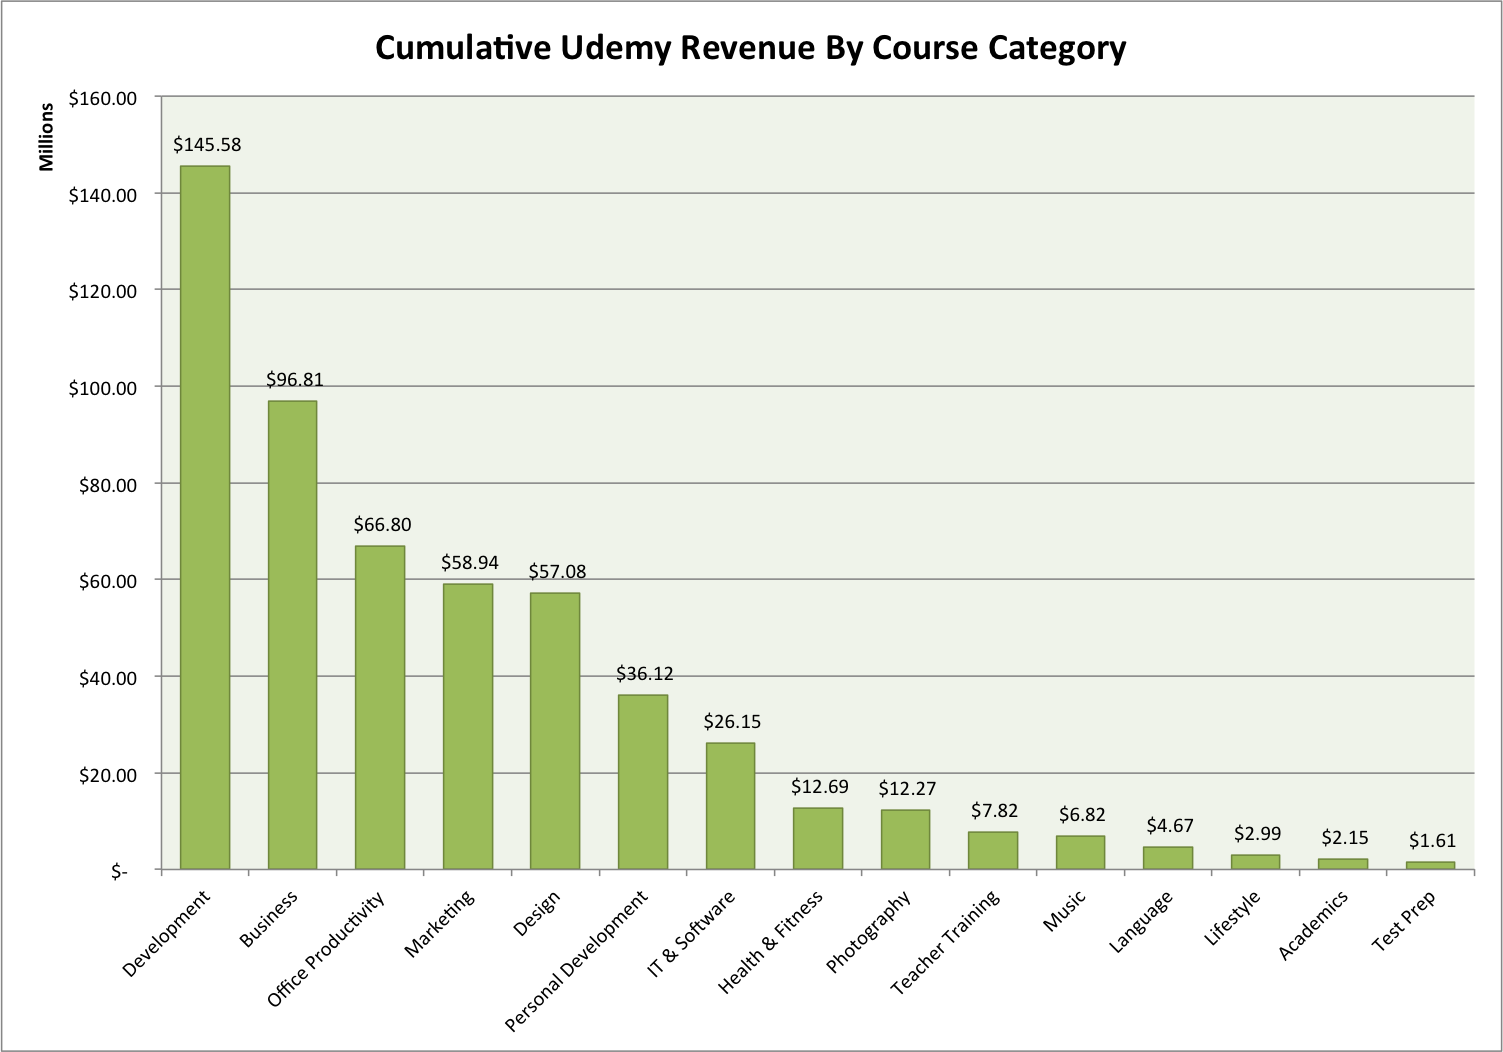 Software development and business dominate Udemy's portfolio in terms of revenue.